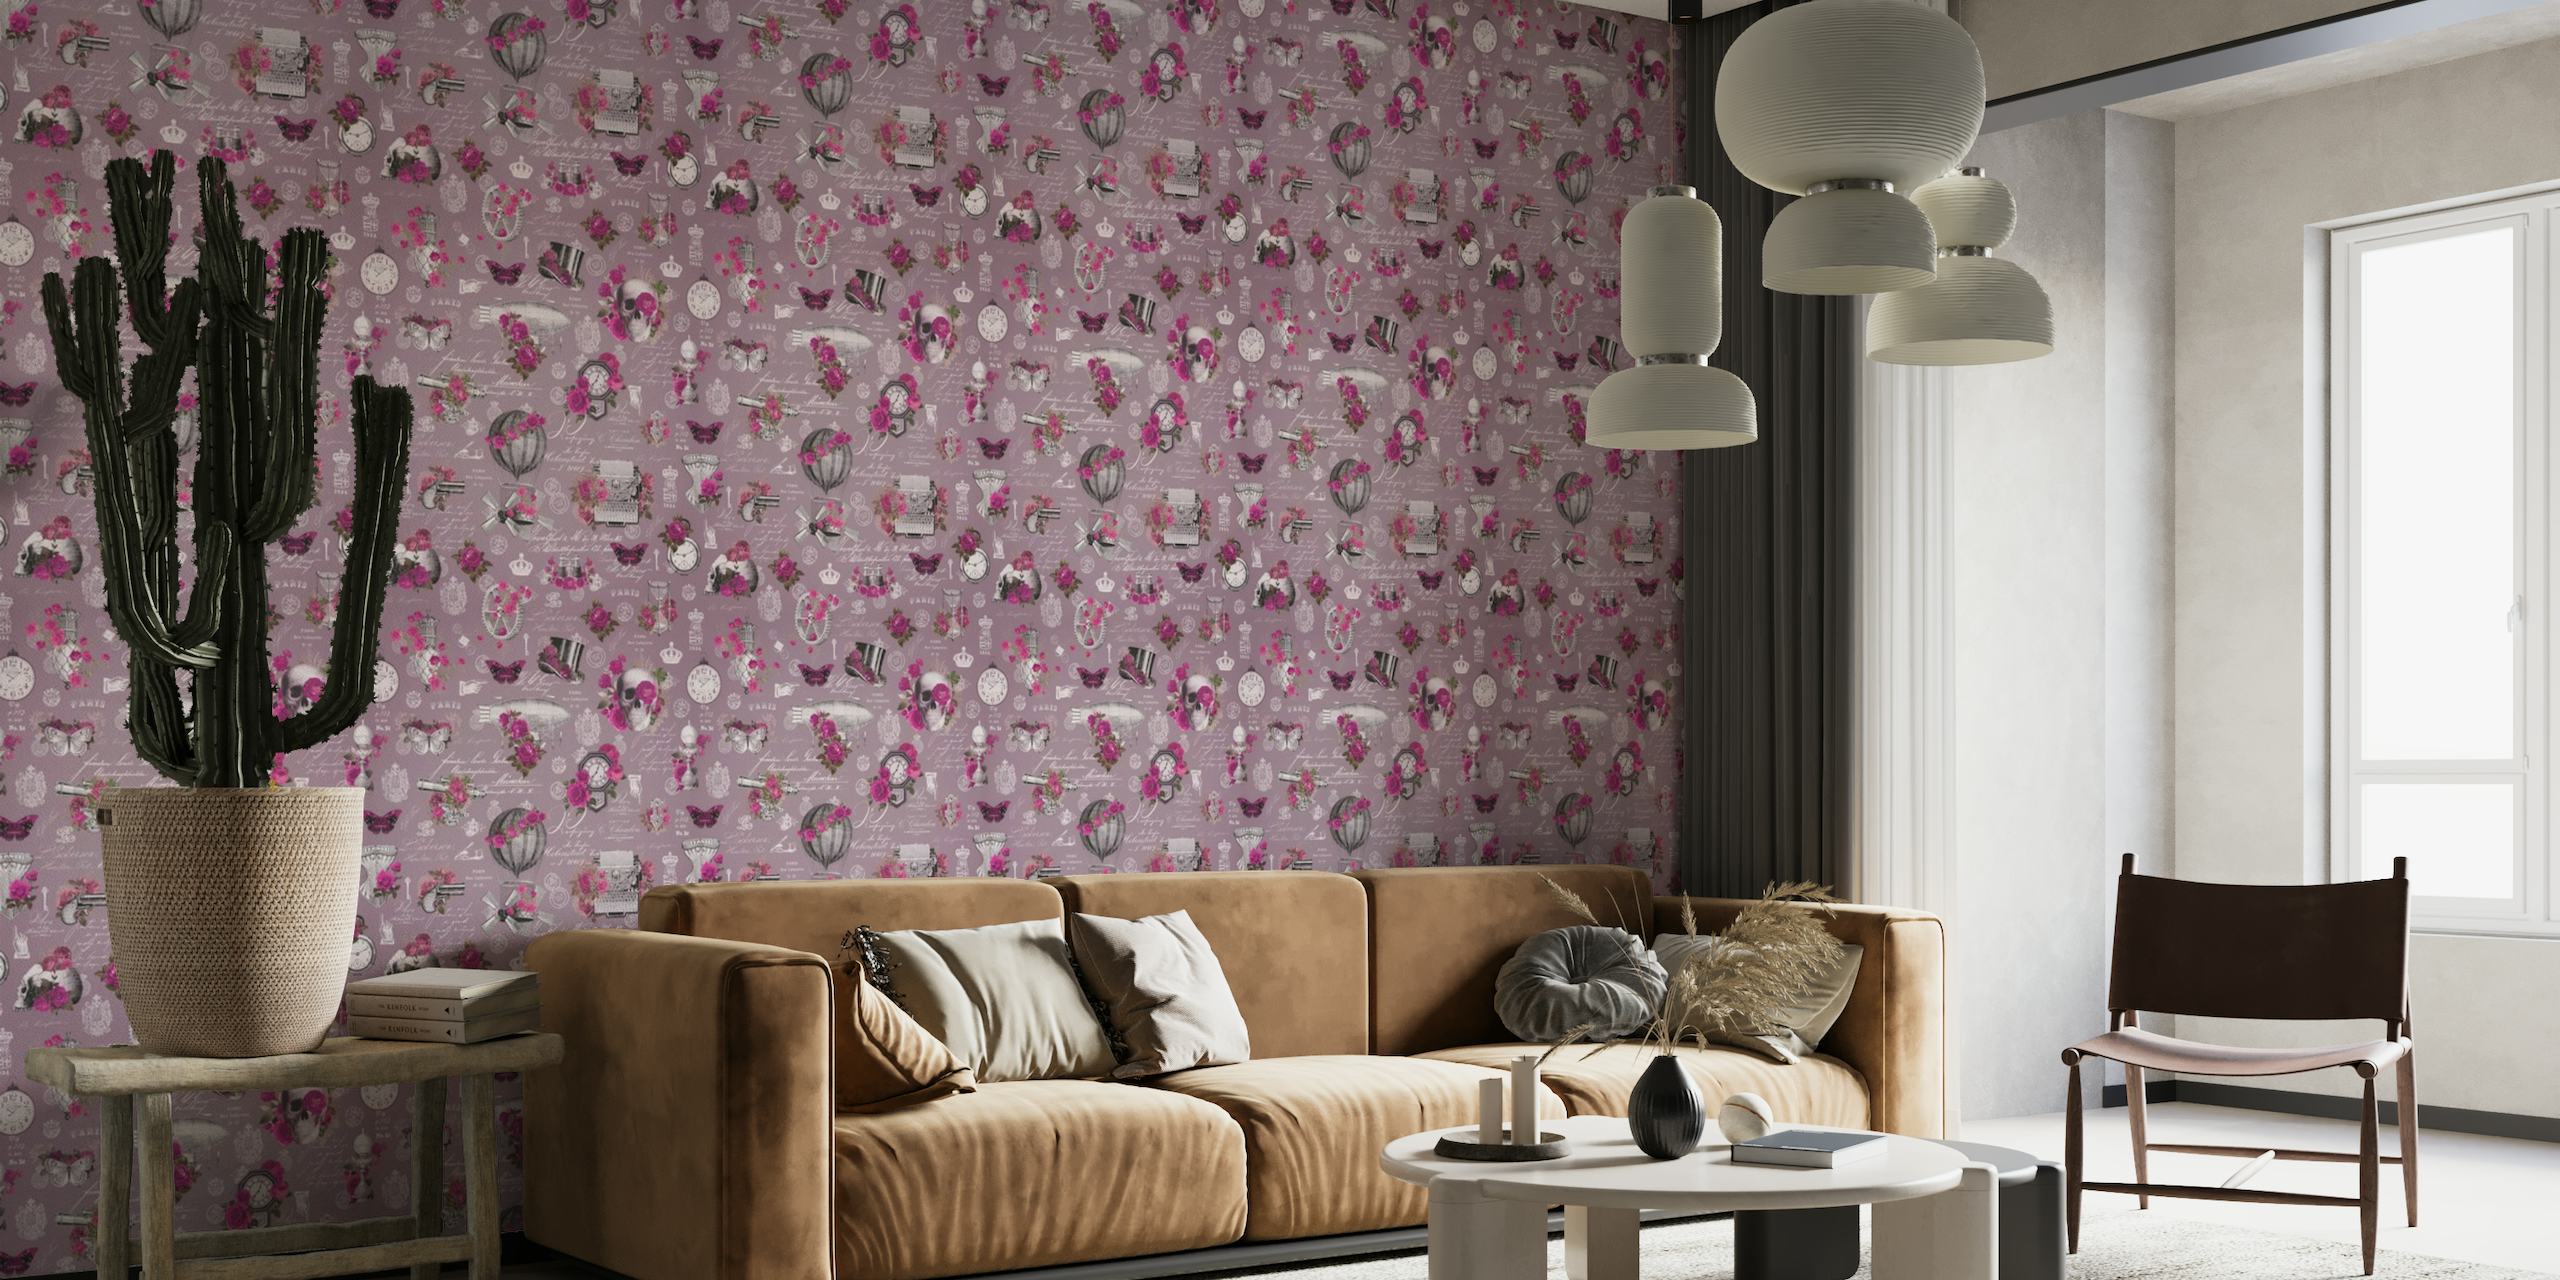 Steampunk-inspired wall mural featuring magenta roses, mechanical gears, and baroque details